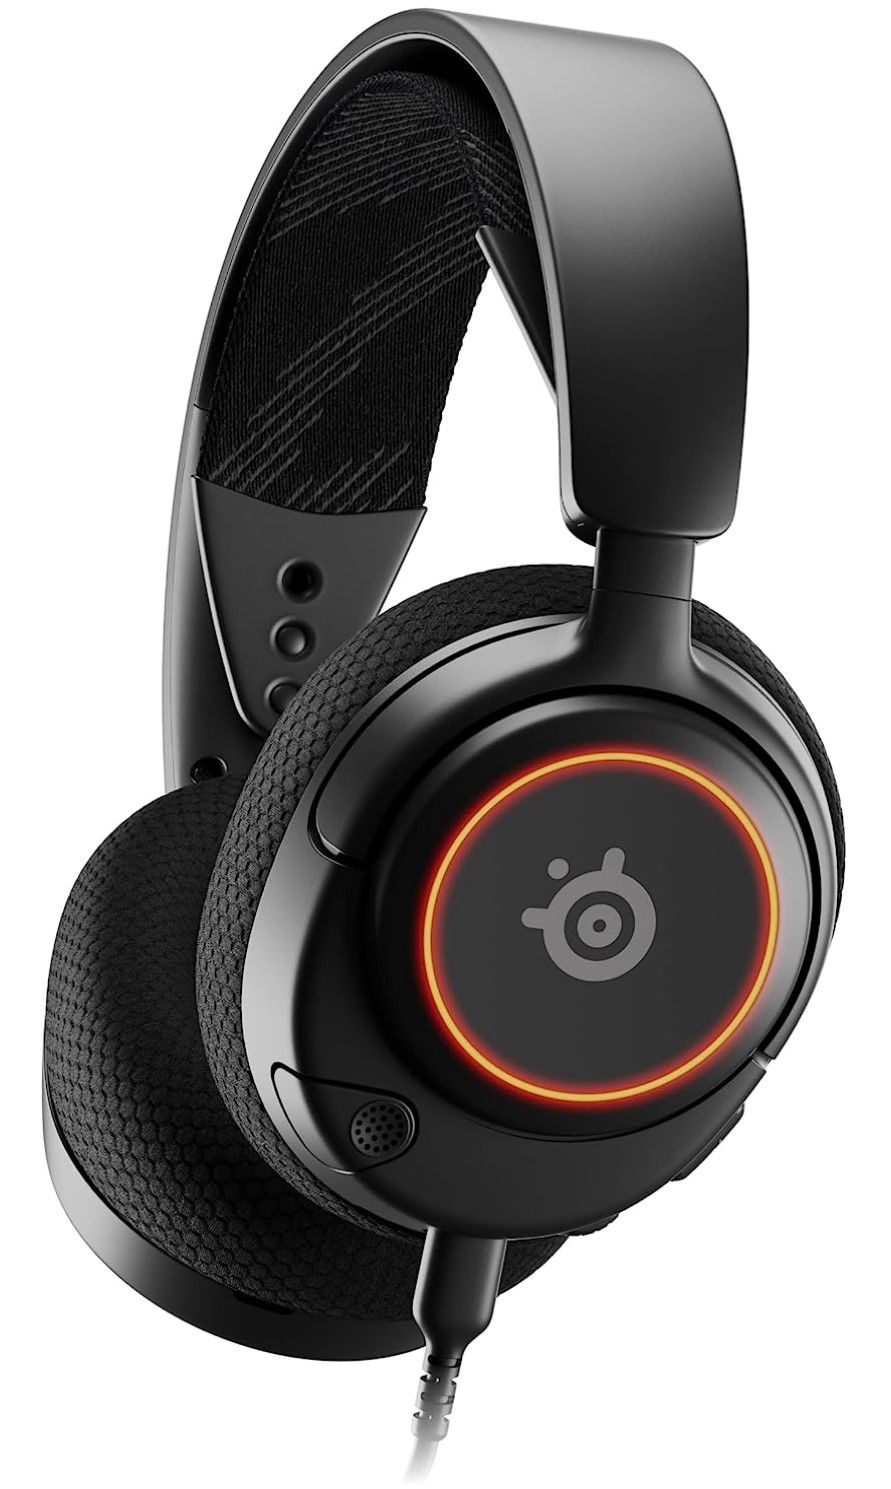  Logitech G335 Wired Gaming Headset, with Flip to Mute  Microphone, 3.5mm Audio Jack, Memory Foam Earpads, Lightweight, Compatible  with PC, PlayStation, Xbox, Nintendo Switch - Mint : Video Games